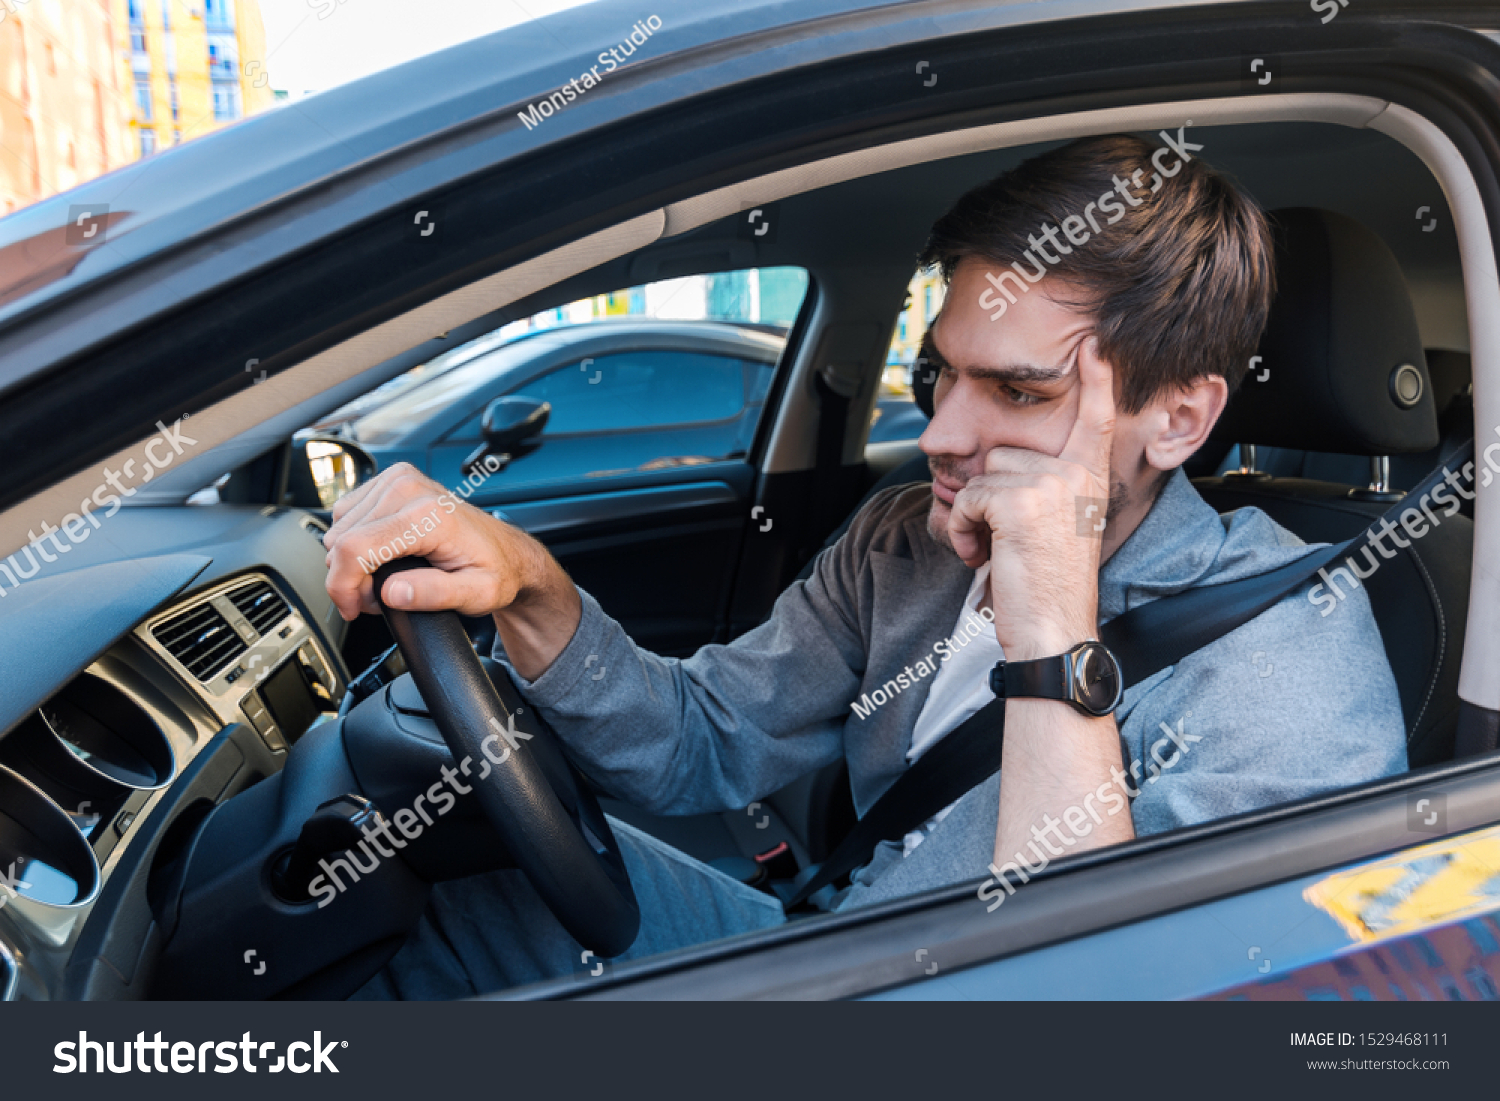 Annoyed tired young man is riding driving car. Businessman is late for meeting. Driver brunette in grey suit stuck in traffic jam. Stressful situations on roads and fast rhythm in modern city. #1529468111